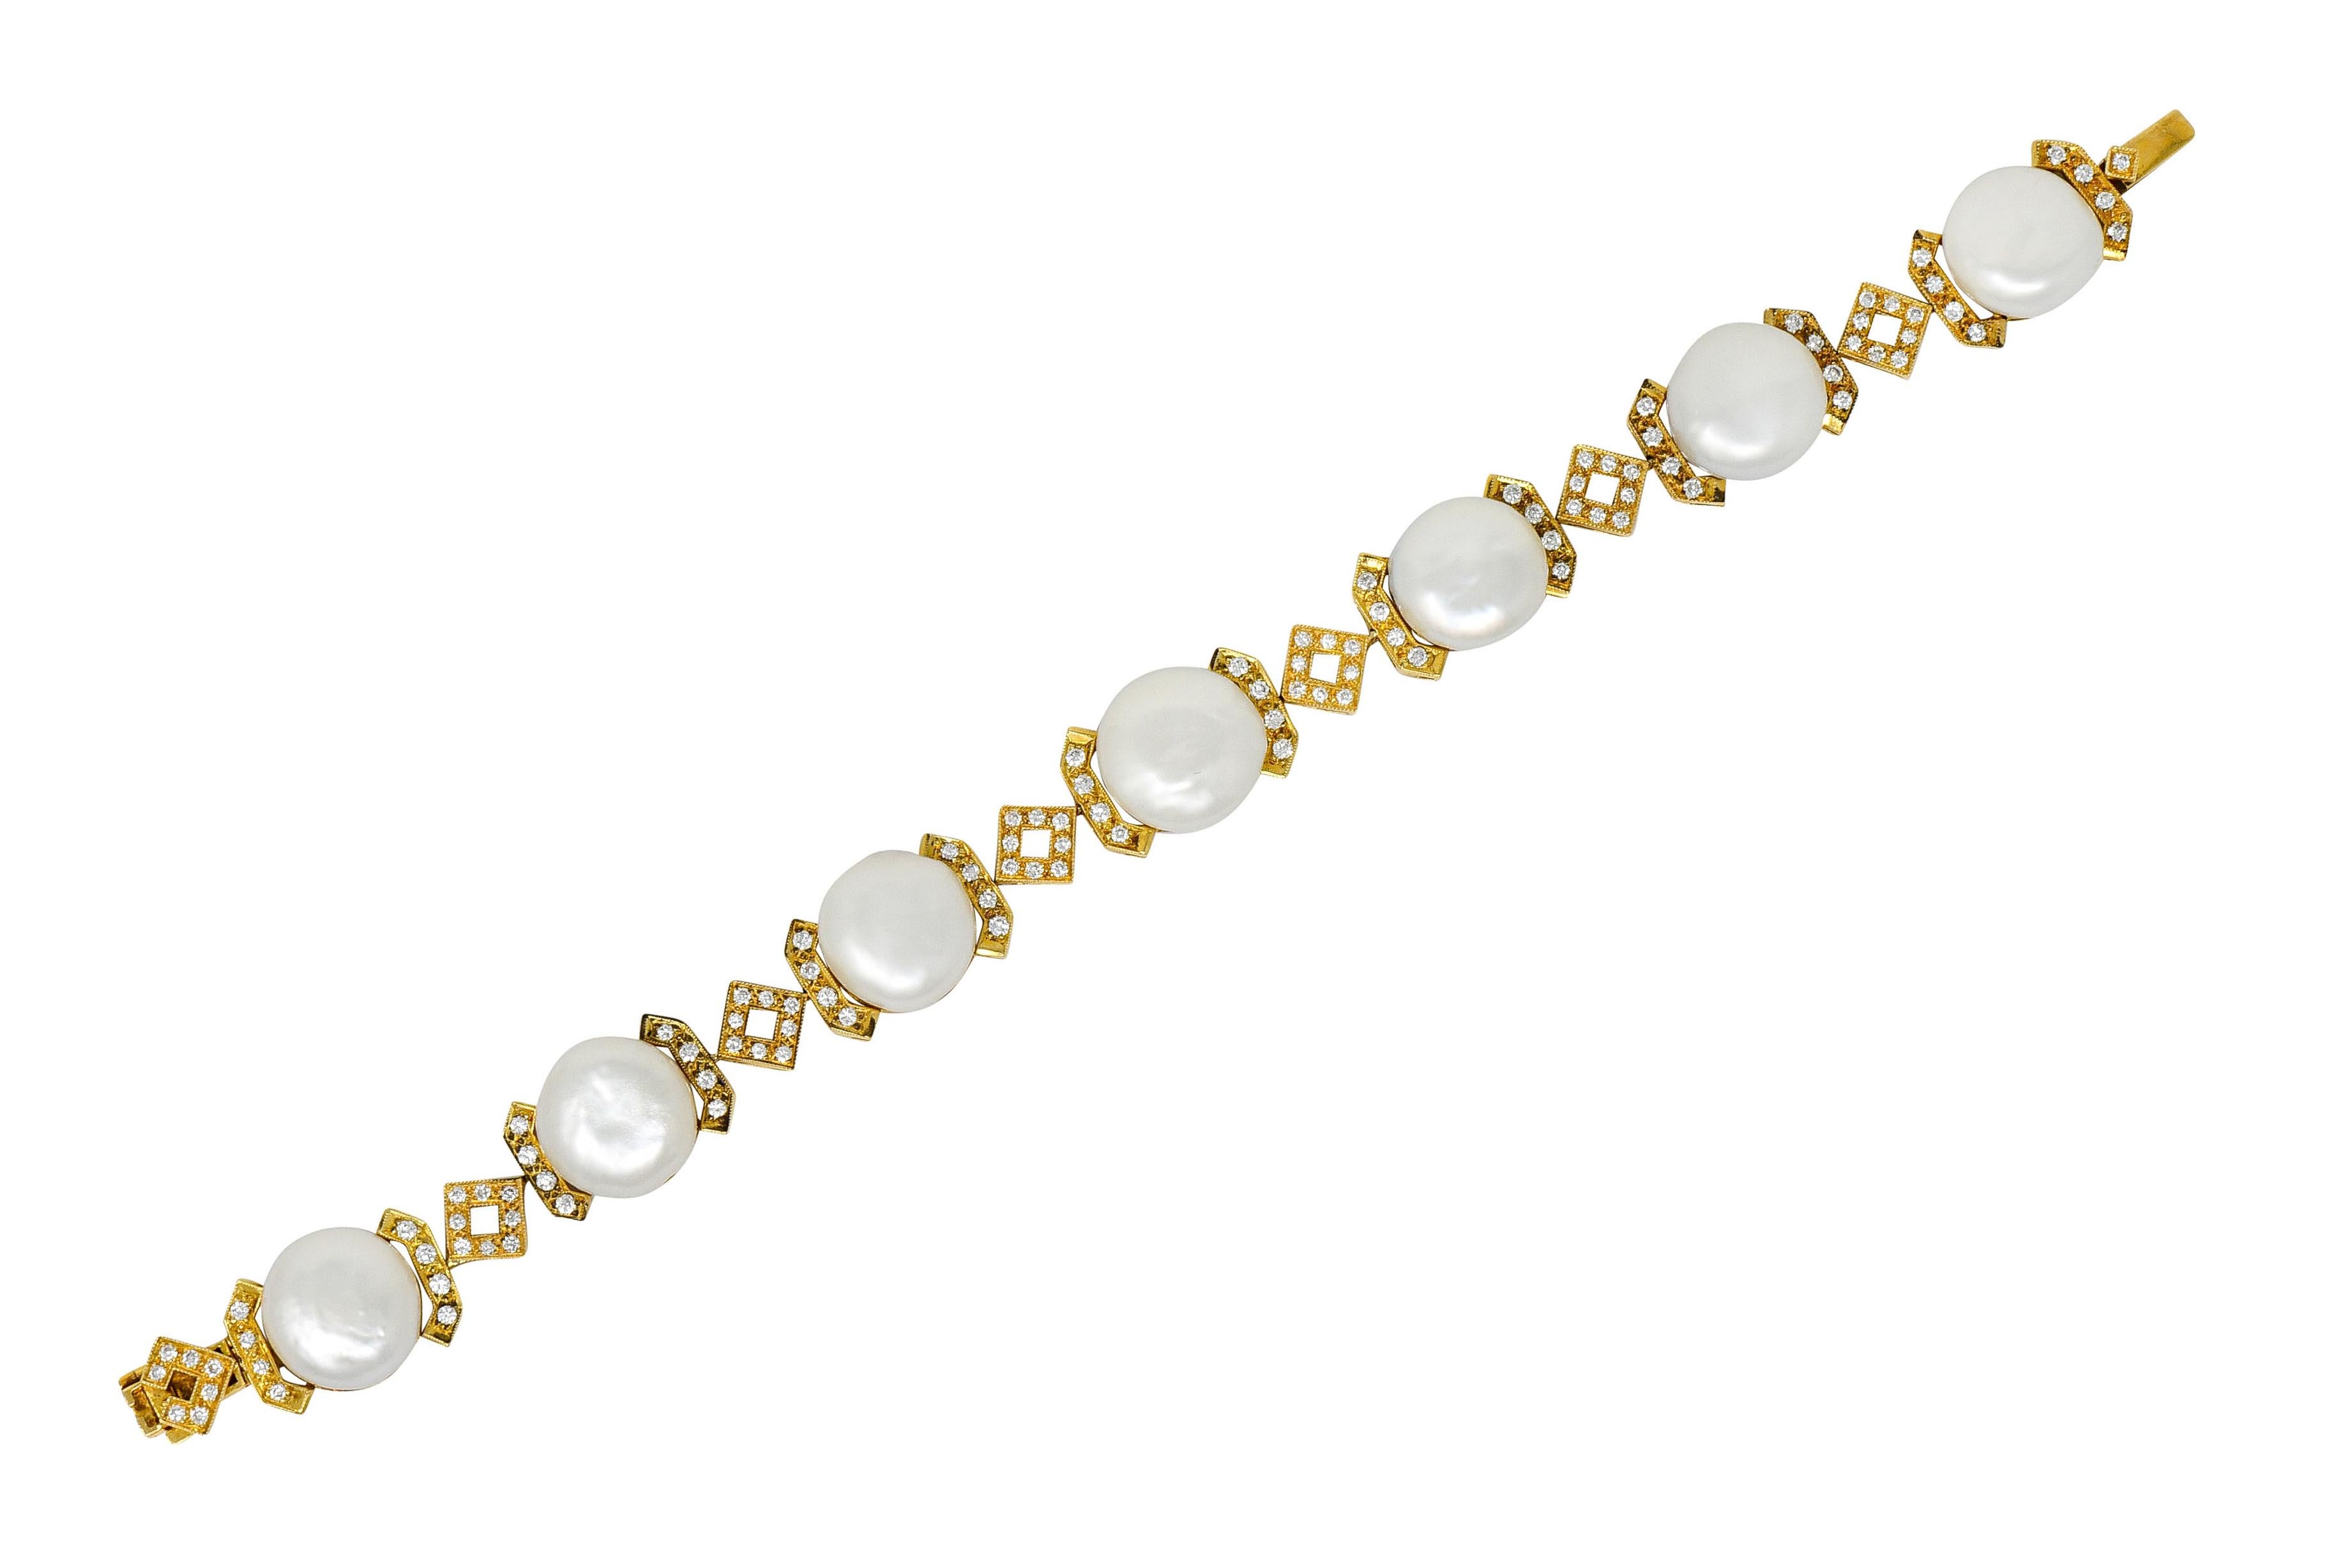 Link style bracelet designed as geometric links with milgrain detail and features seven round keshi pearls

Measuring approximately 12.0 mm with well-matched white body color and excellent luster

Bead set throughout with round brilliant cut